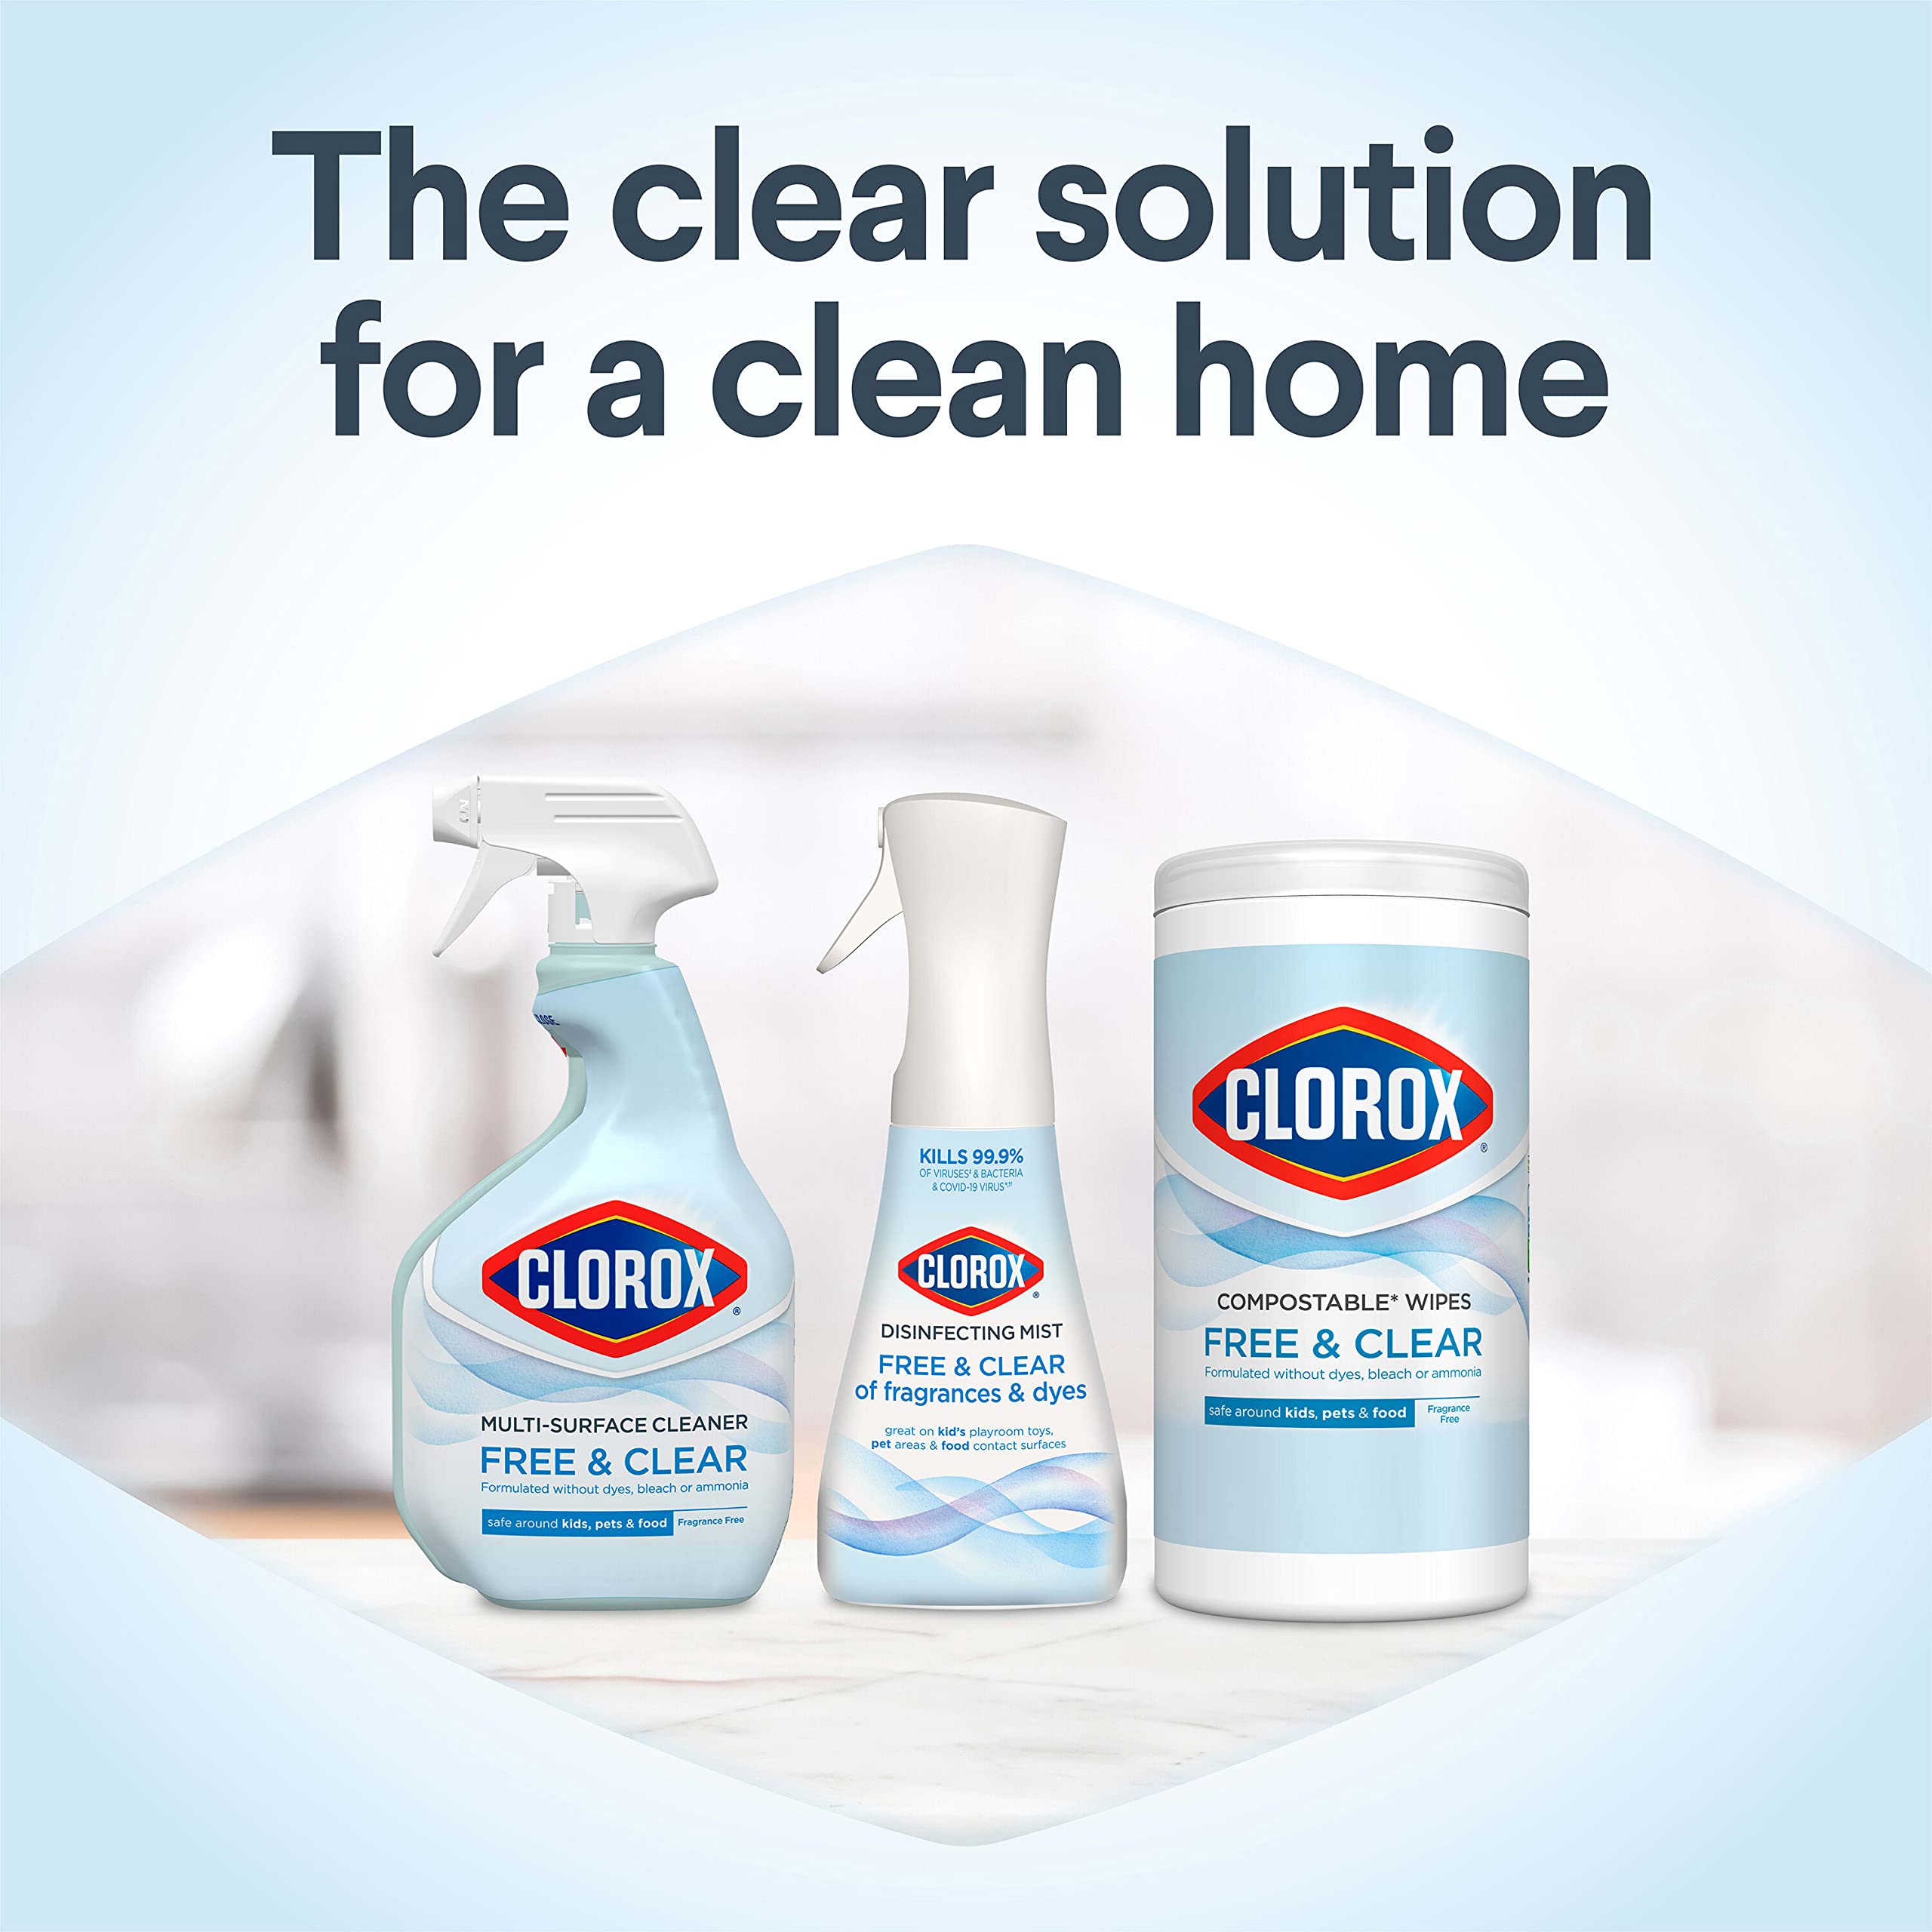 Clorox Free & Clear Disinfecting Mist, 1 Spray Bottle and 1 Refill, 14 Fl Oz Each